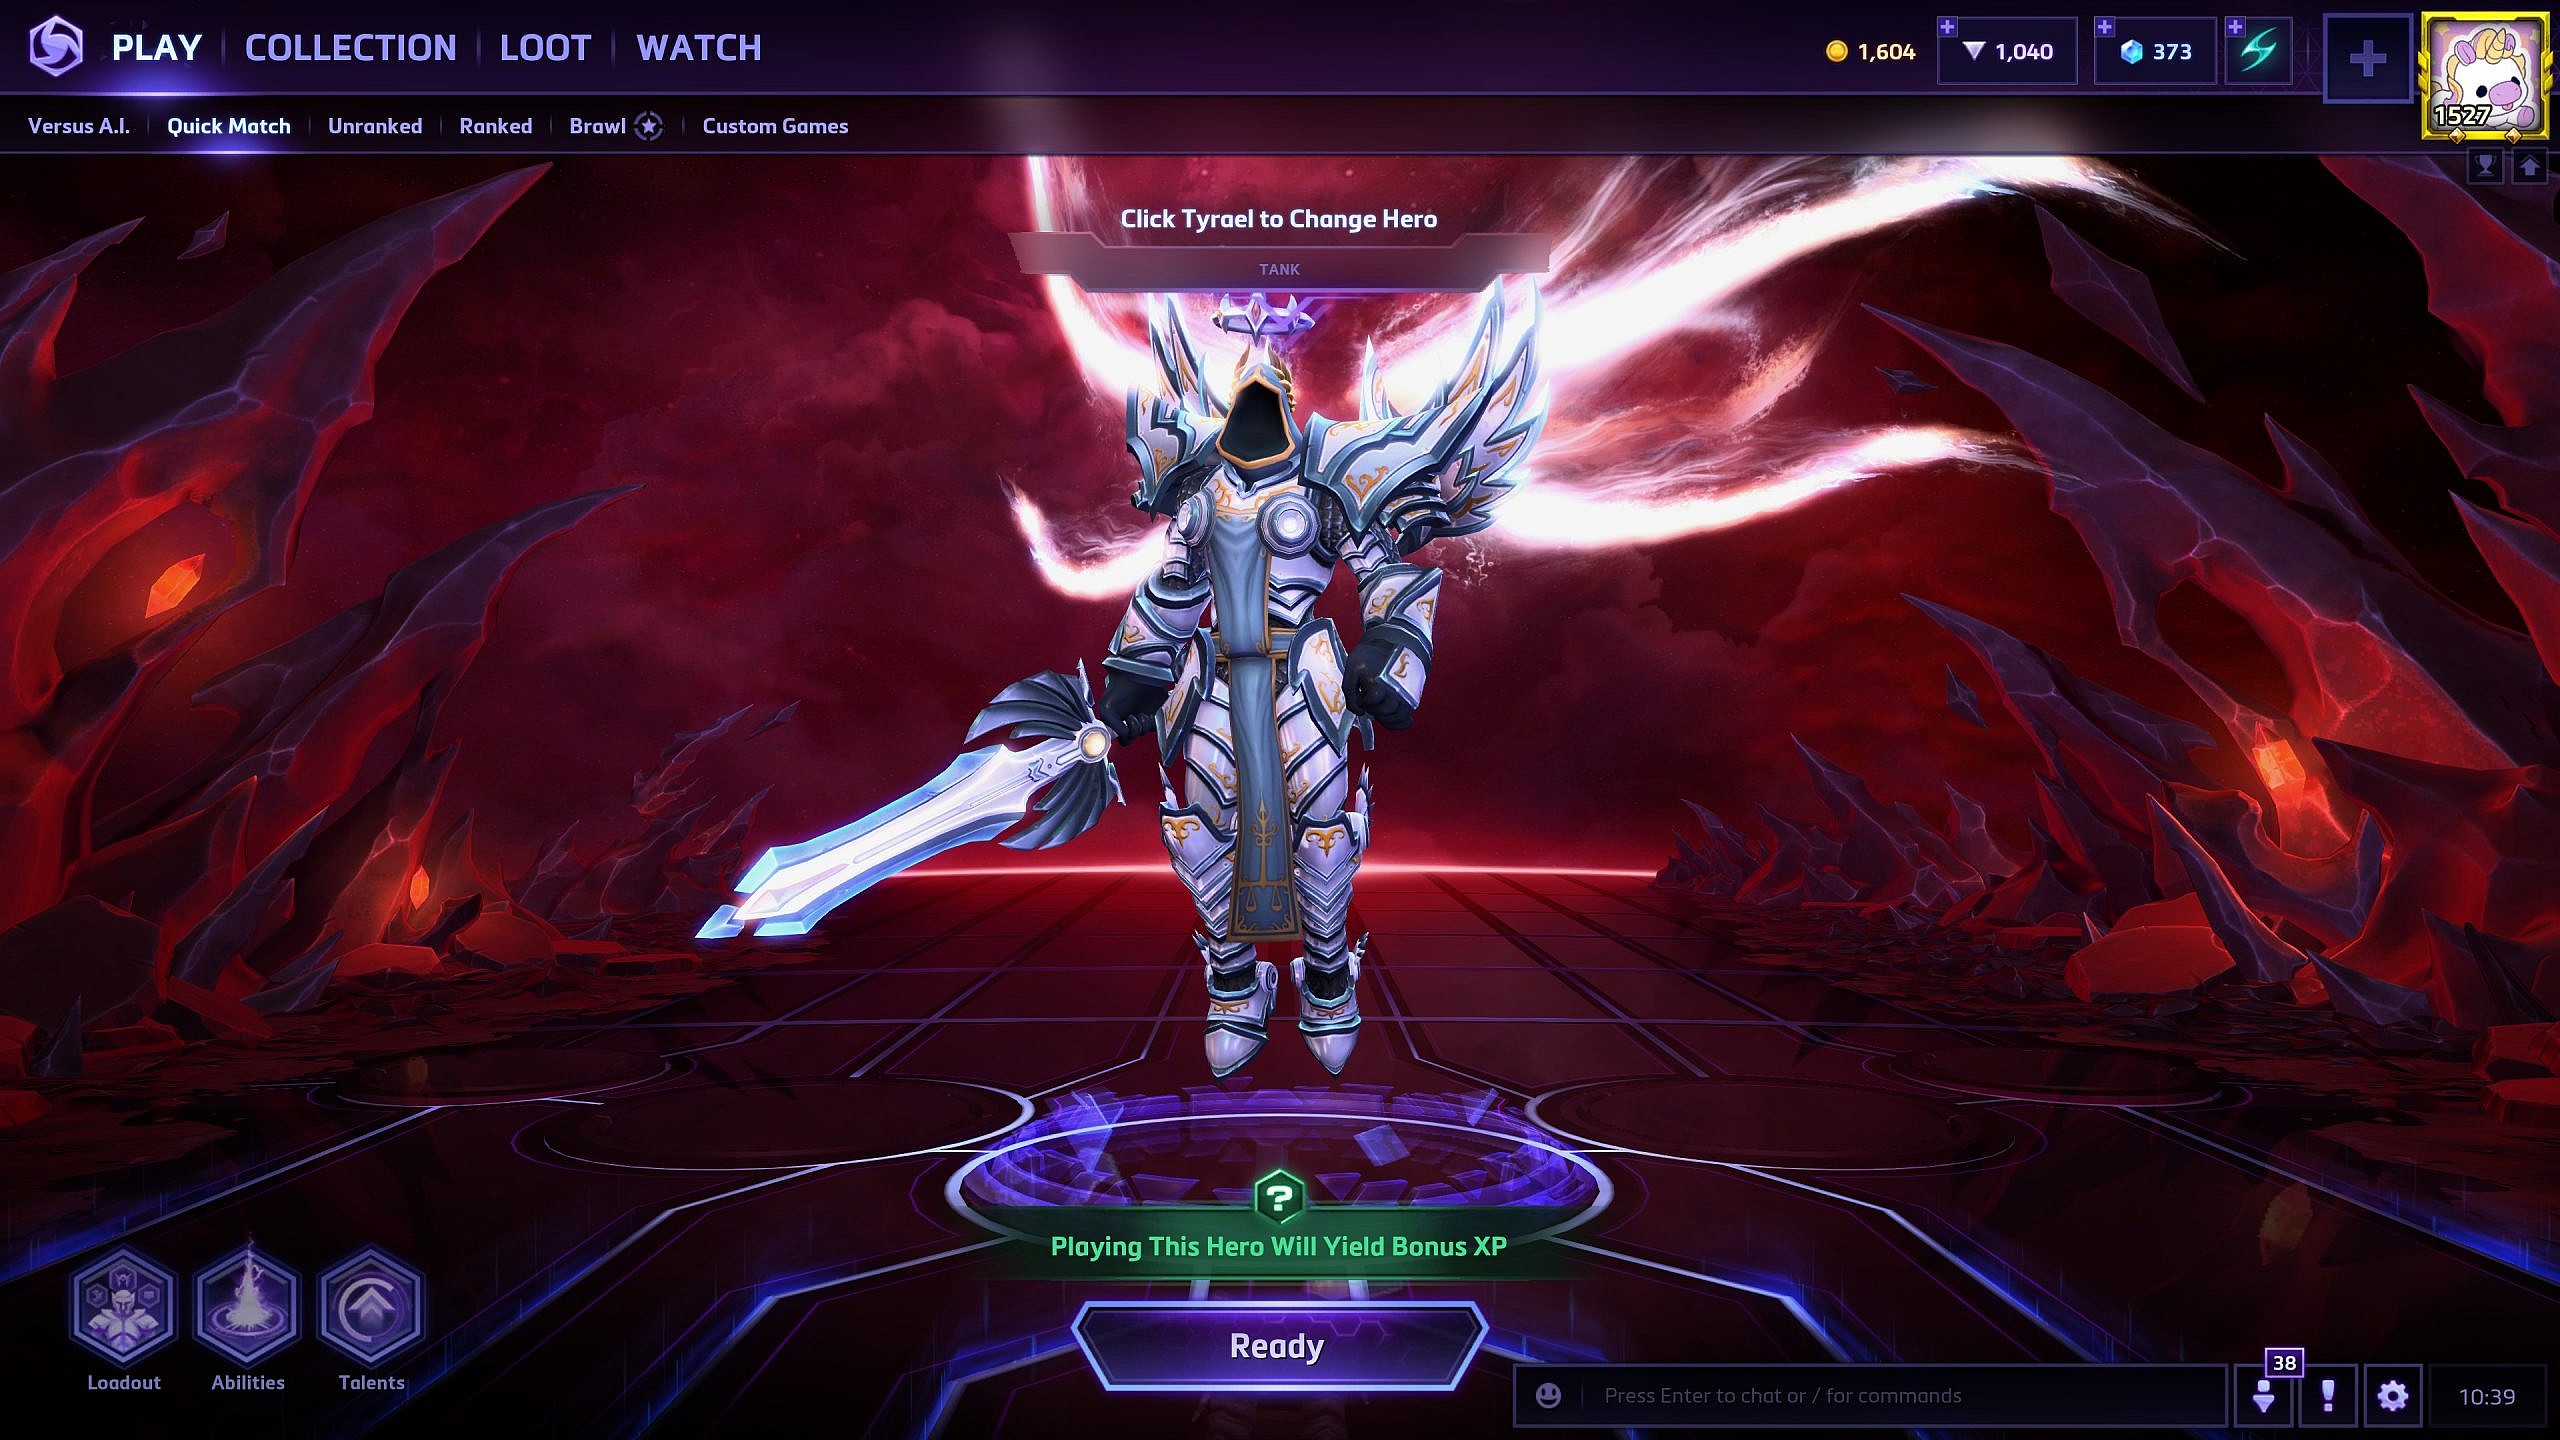 HotS Update Makes Significant Changes to Tyrael and Fixes Bugs